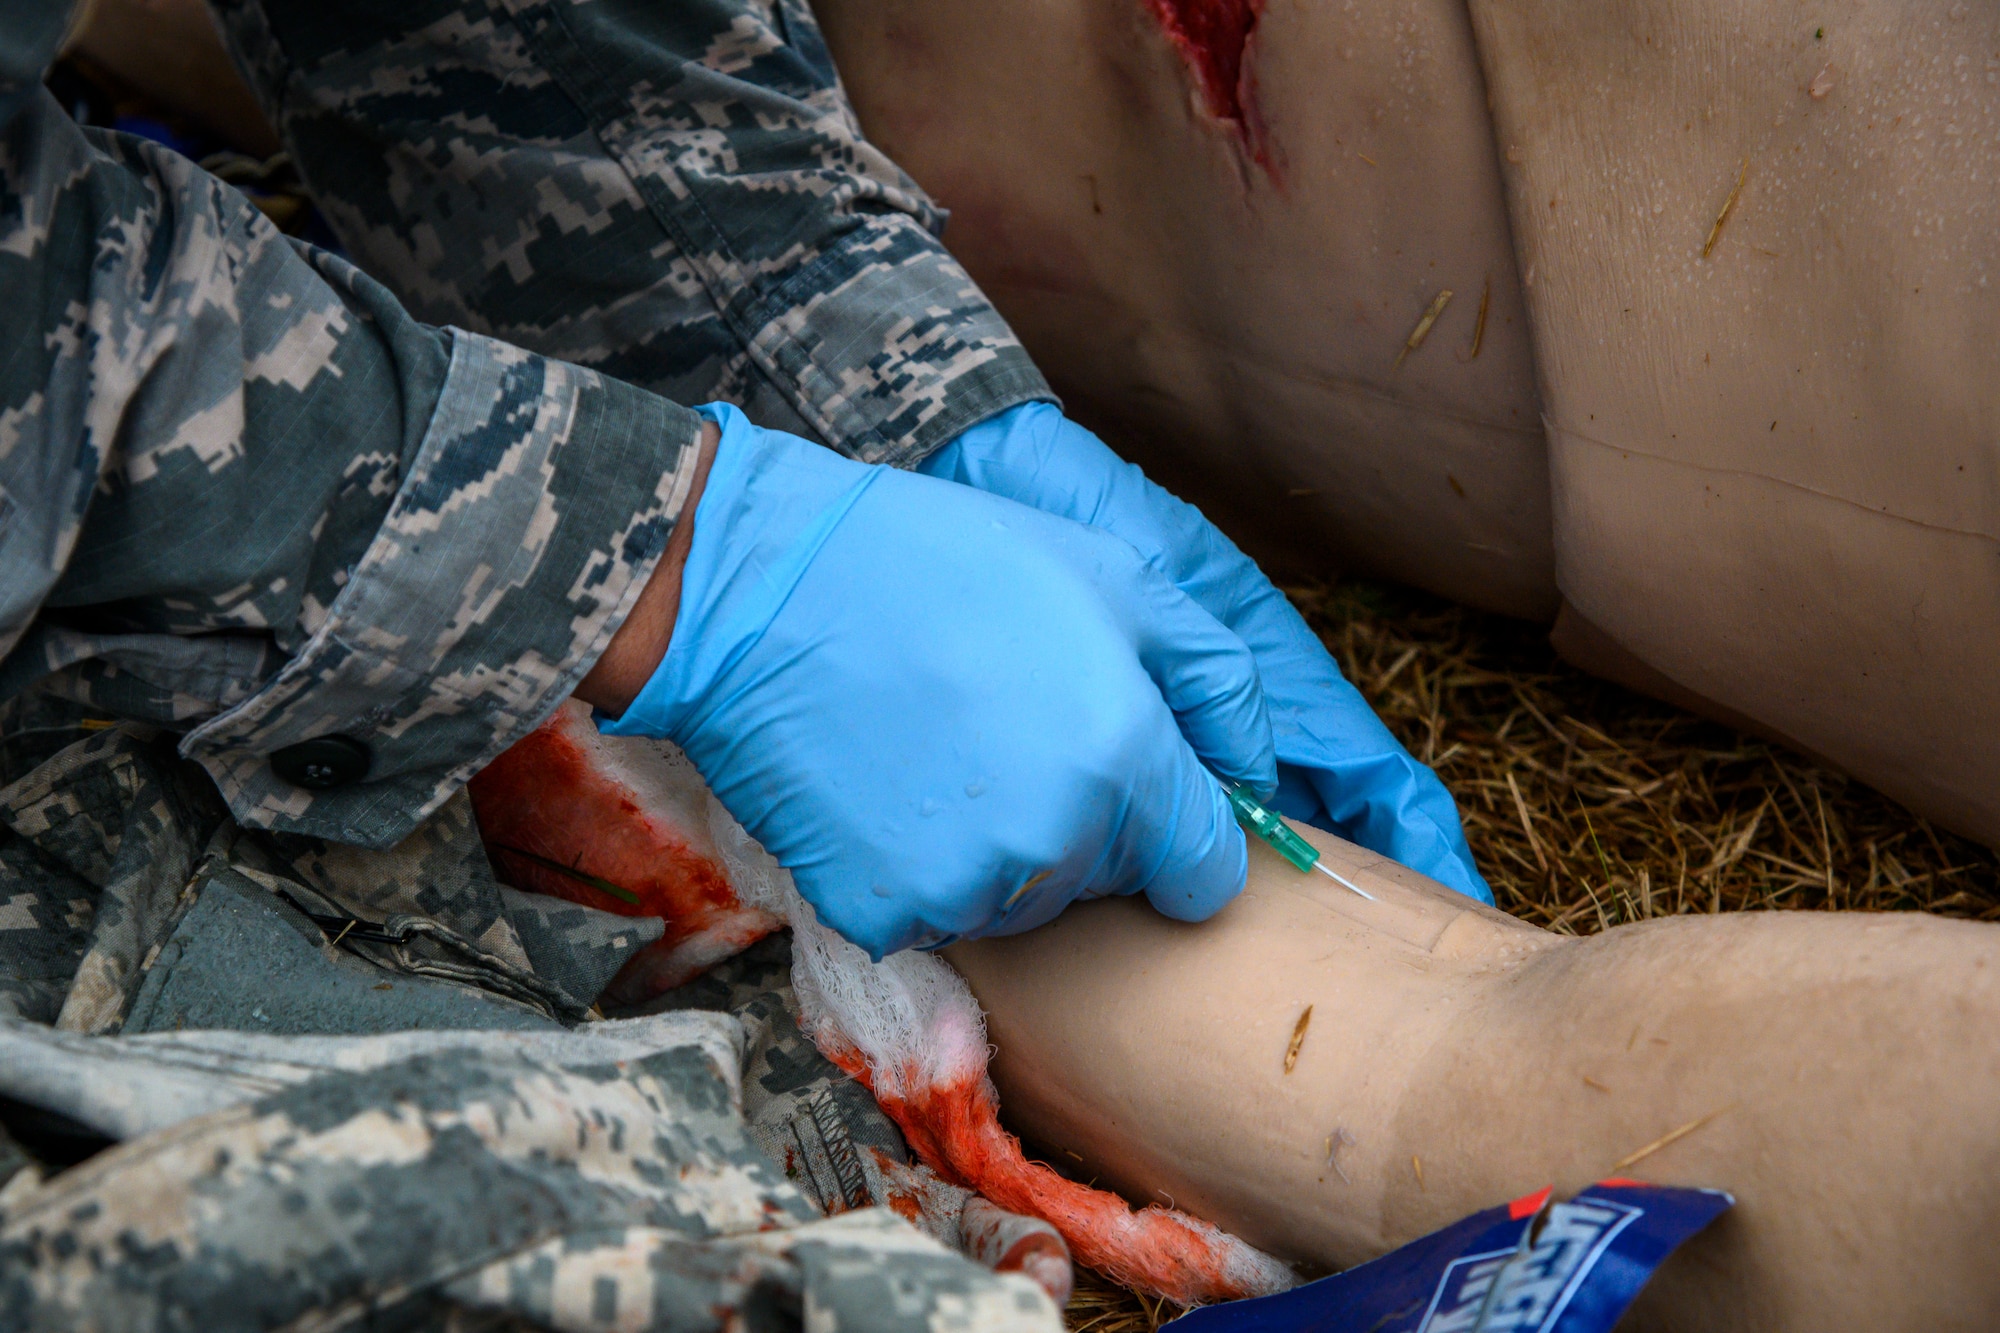 U.S. Air Force Tech. Sgt. Darin Hoki, a 14th Fighter Squadron individual duty medical technician, inserts an intravenous therapy catheter into a stimulated critically injured patient during Agile Combat Employment week at Misawa Air Base, Japan, Dec. 10, 2020. Tactical Combat Casualty Care (TCCC) is a new Air Force initiative, which will eventually replace the current Self-Aid Buddy Care training to better prepare personnel to perform potential lifesaving treatment in a variety of challenging environments, whether in contingency or garrison operations. (U.S. Air Force photo by Airman 1st Class China M. Shock)